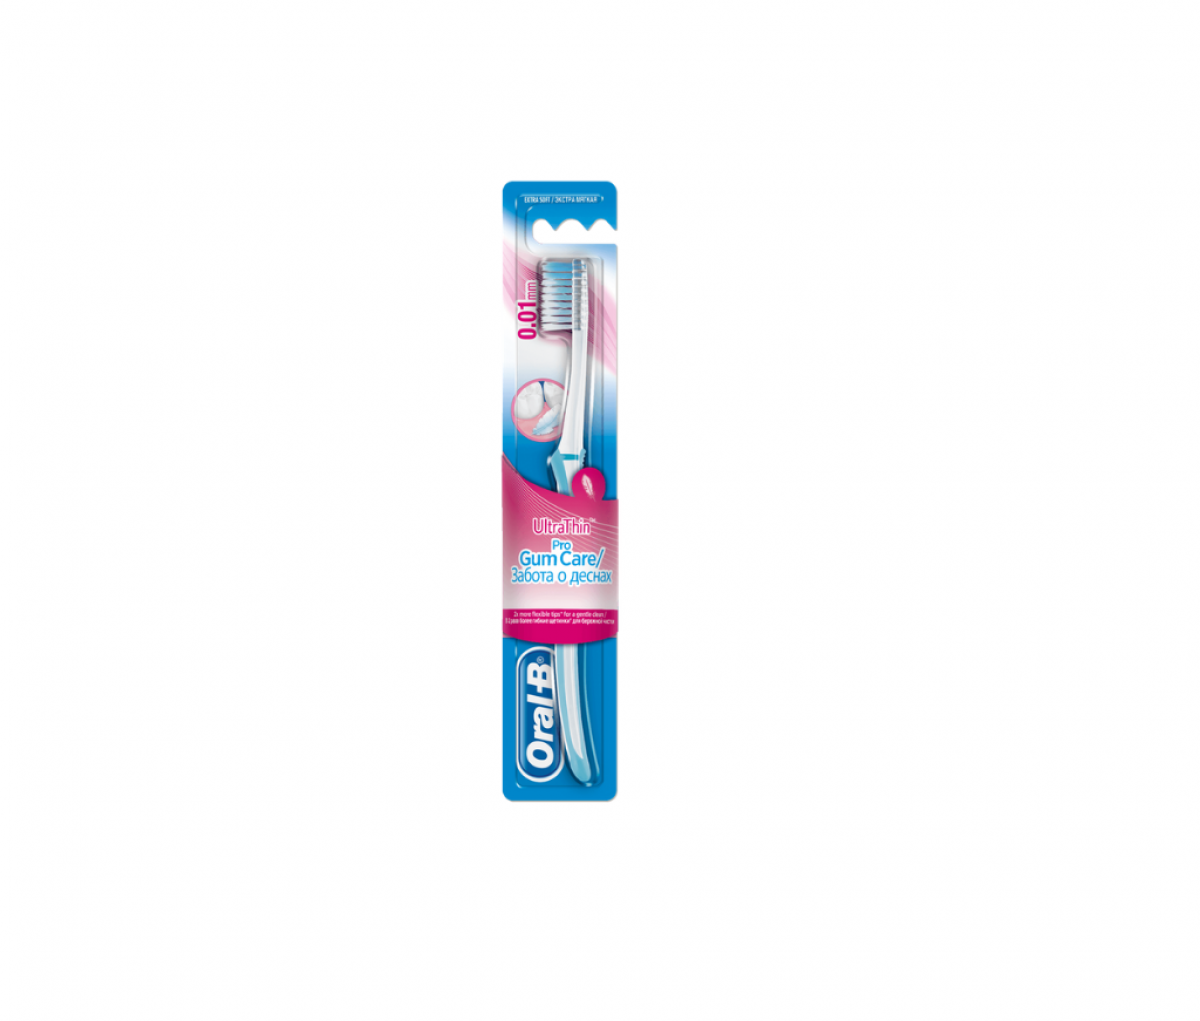 Oral B Ultra Thin Gum Care Silver Toothbrush